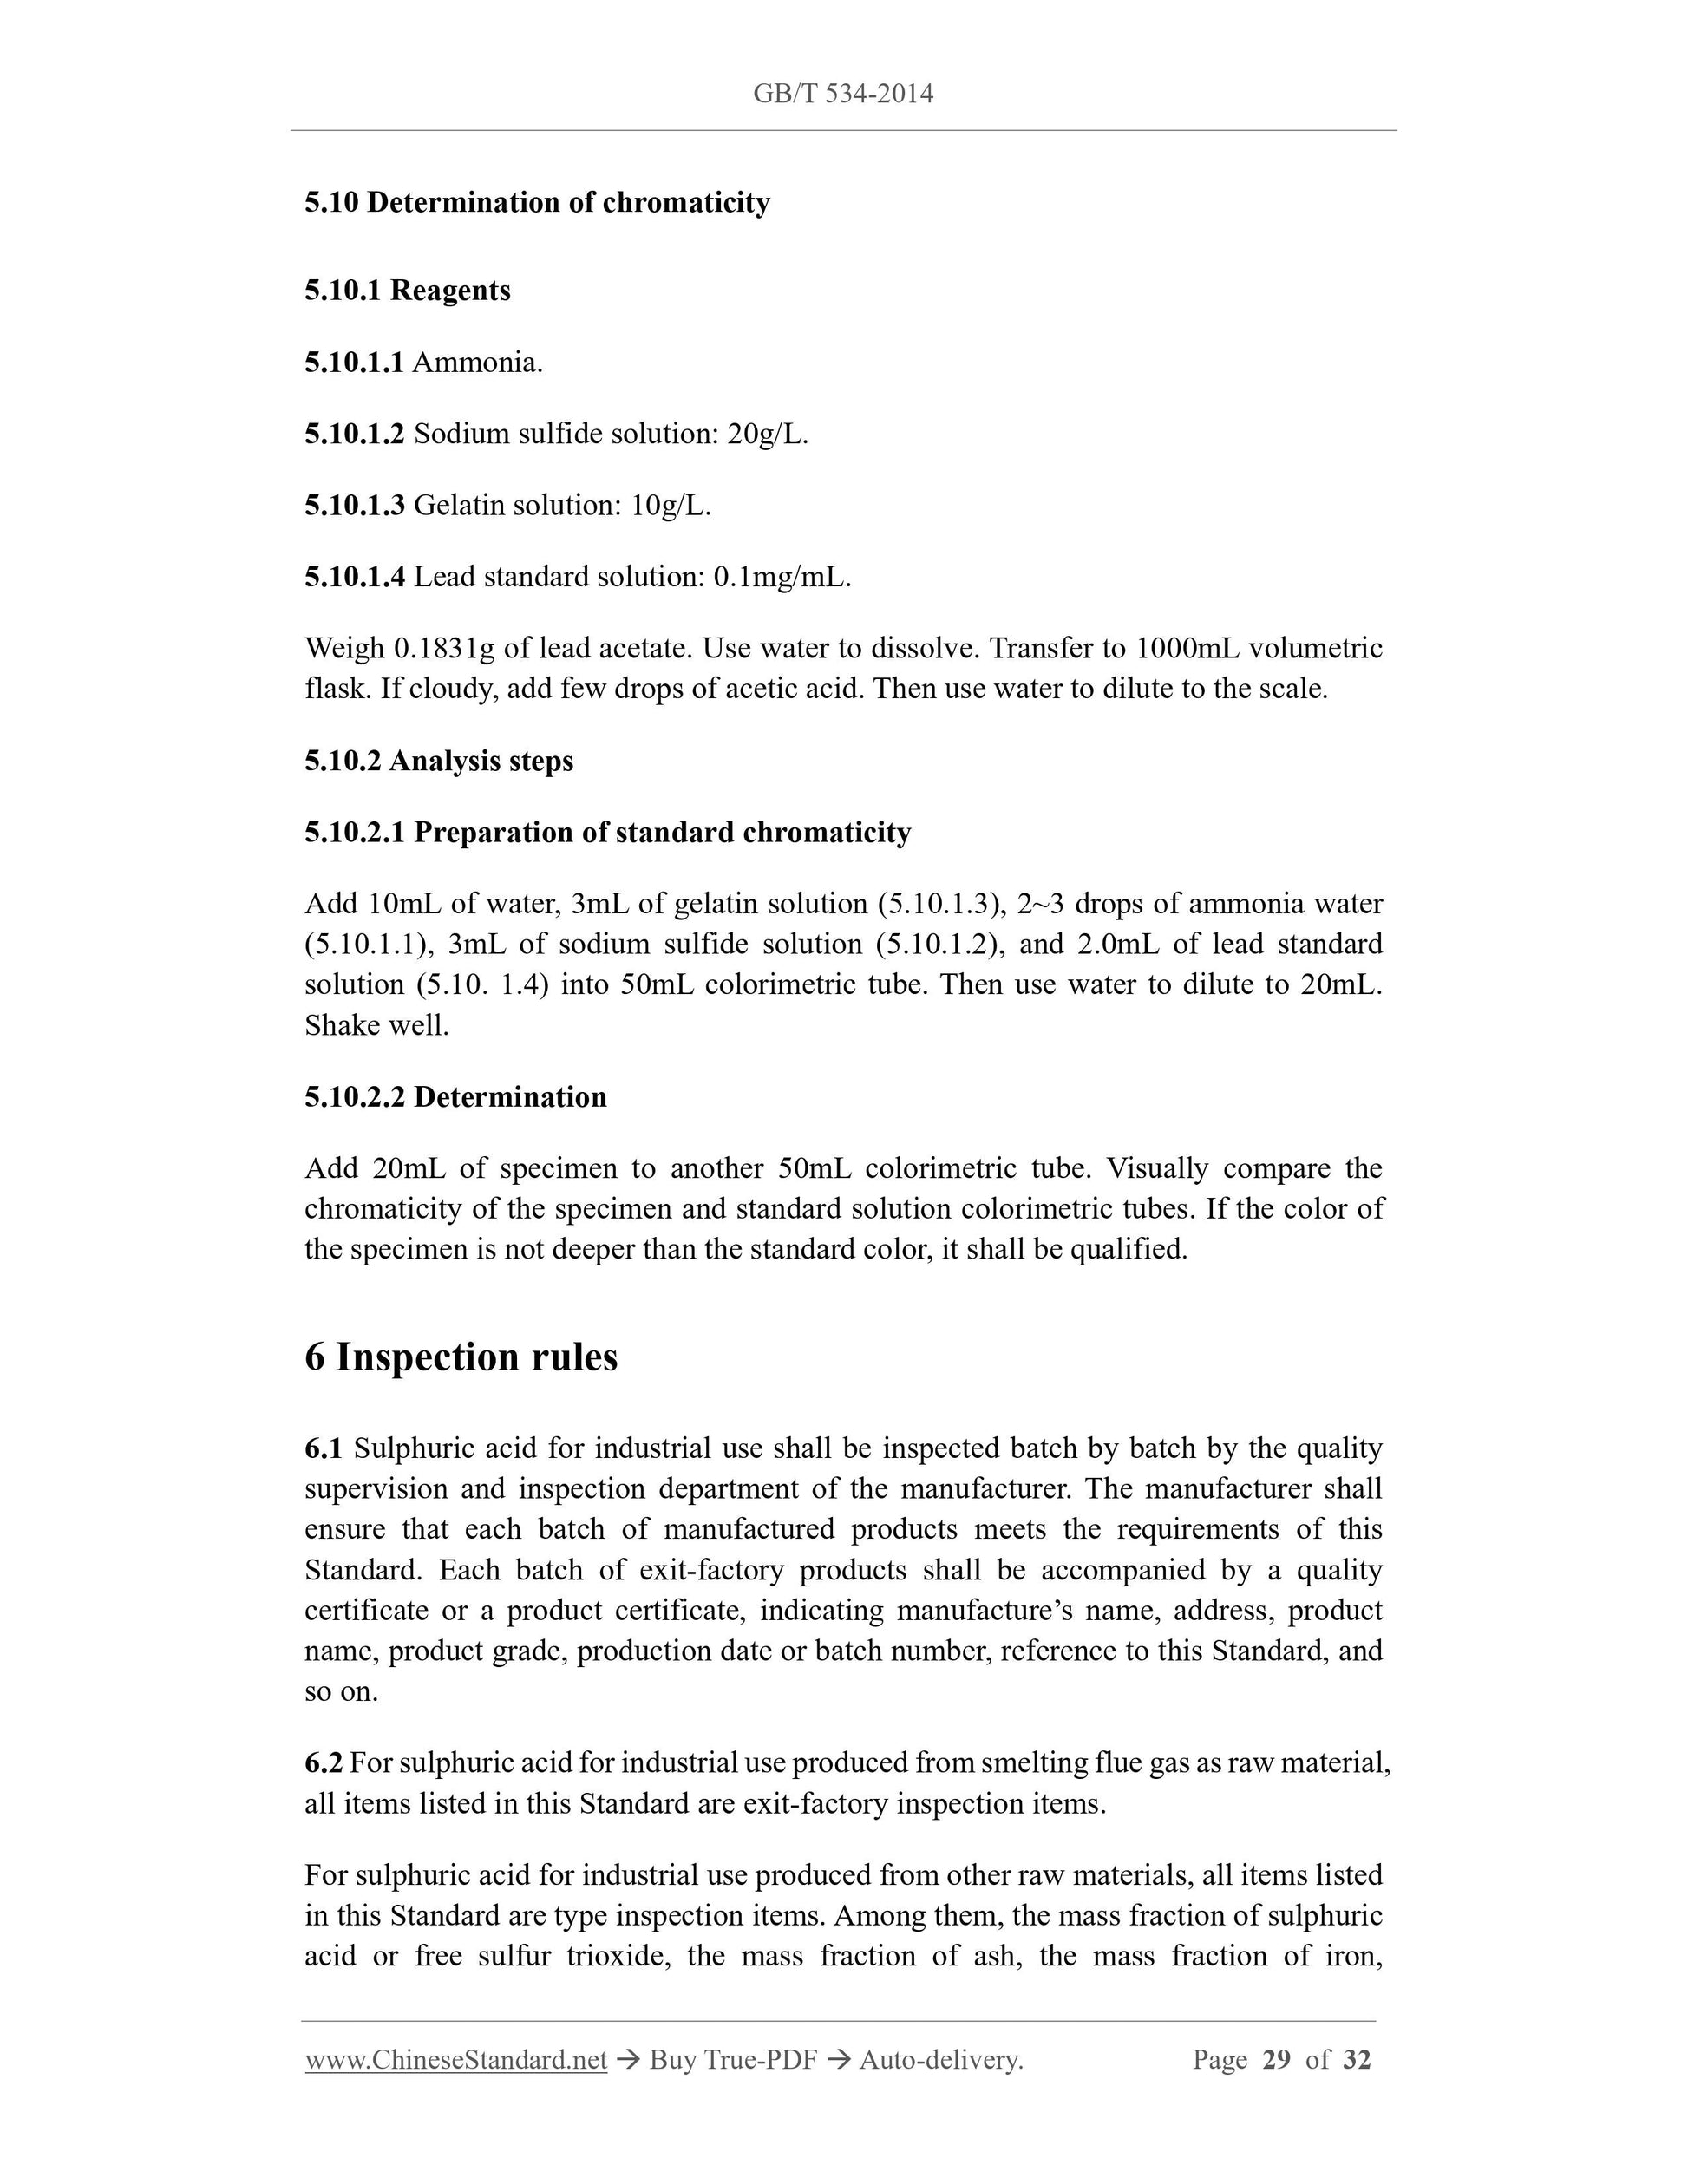 GB/T 534-2014 Page 11